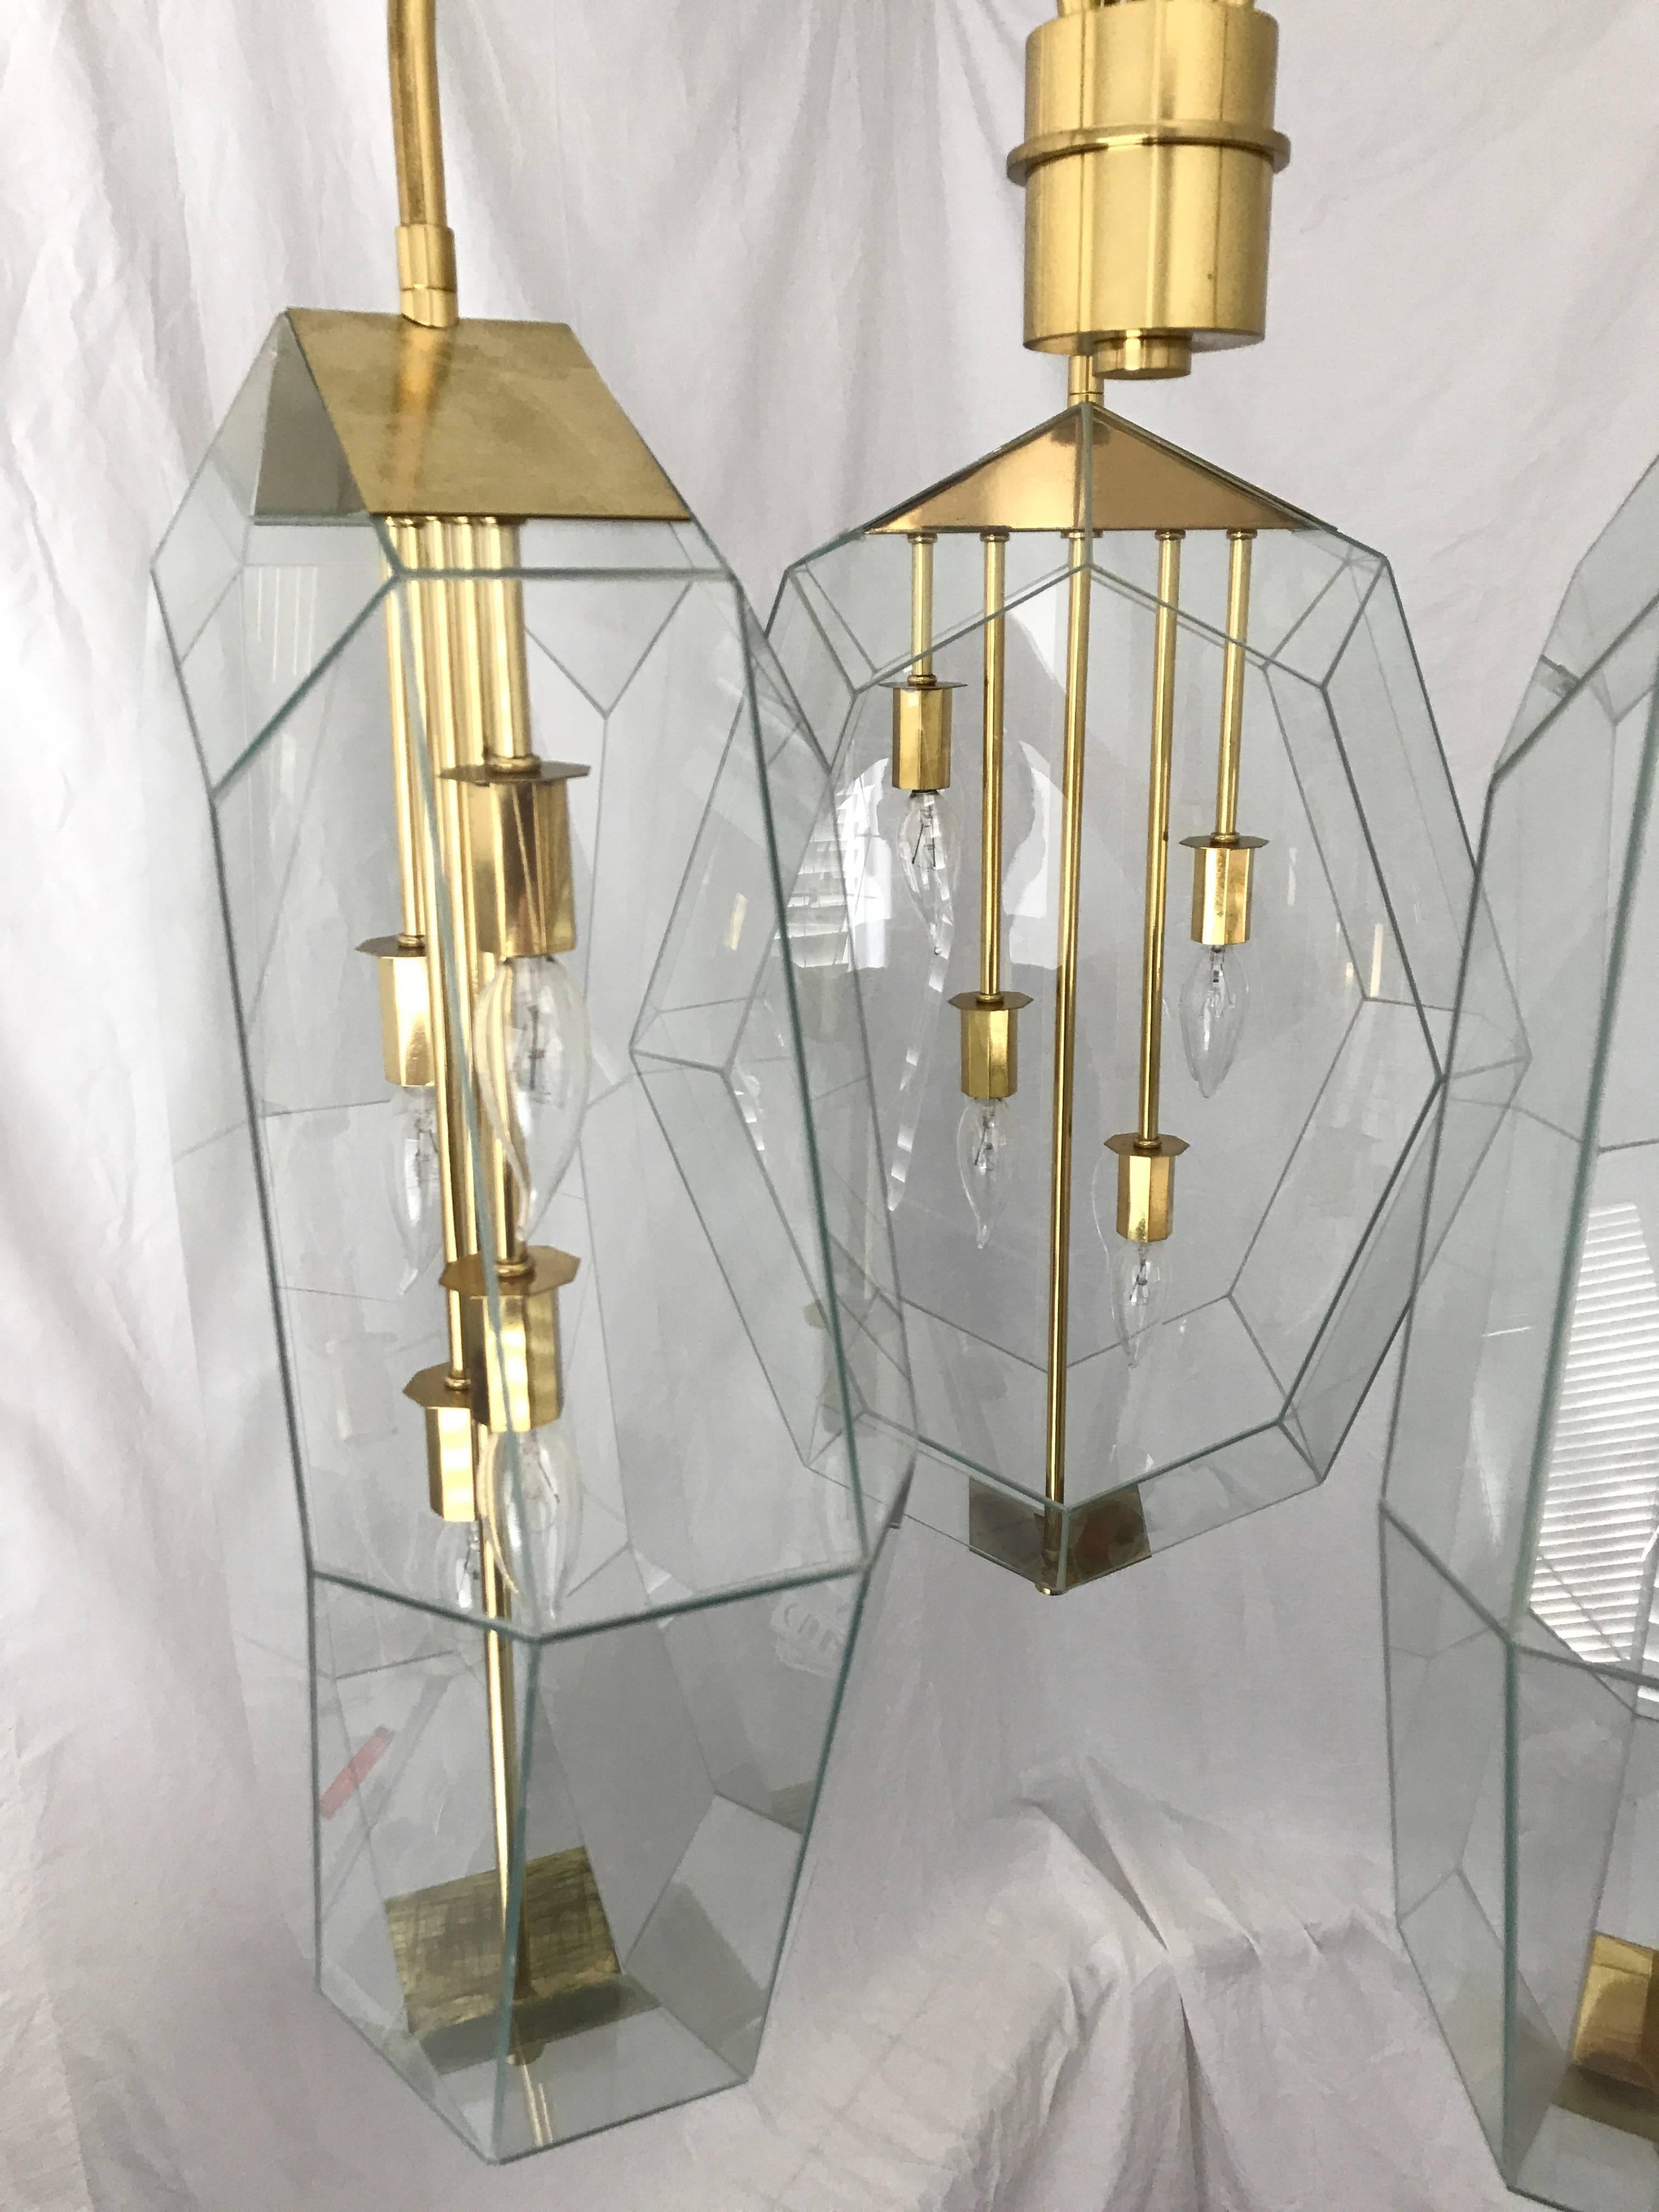 Brass and glass faceted geometric chandelier by the original Morrison custom lighting company of Los Angles, 1970s.